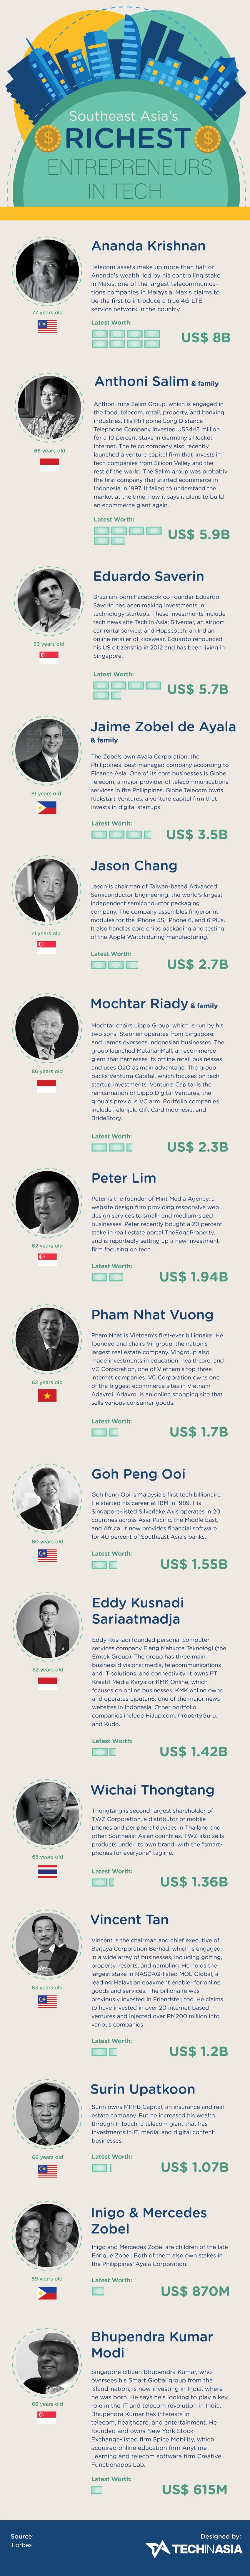 southeast-asia-richest-entreps-in-tech-infographic